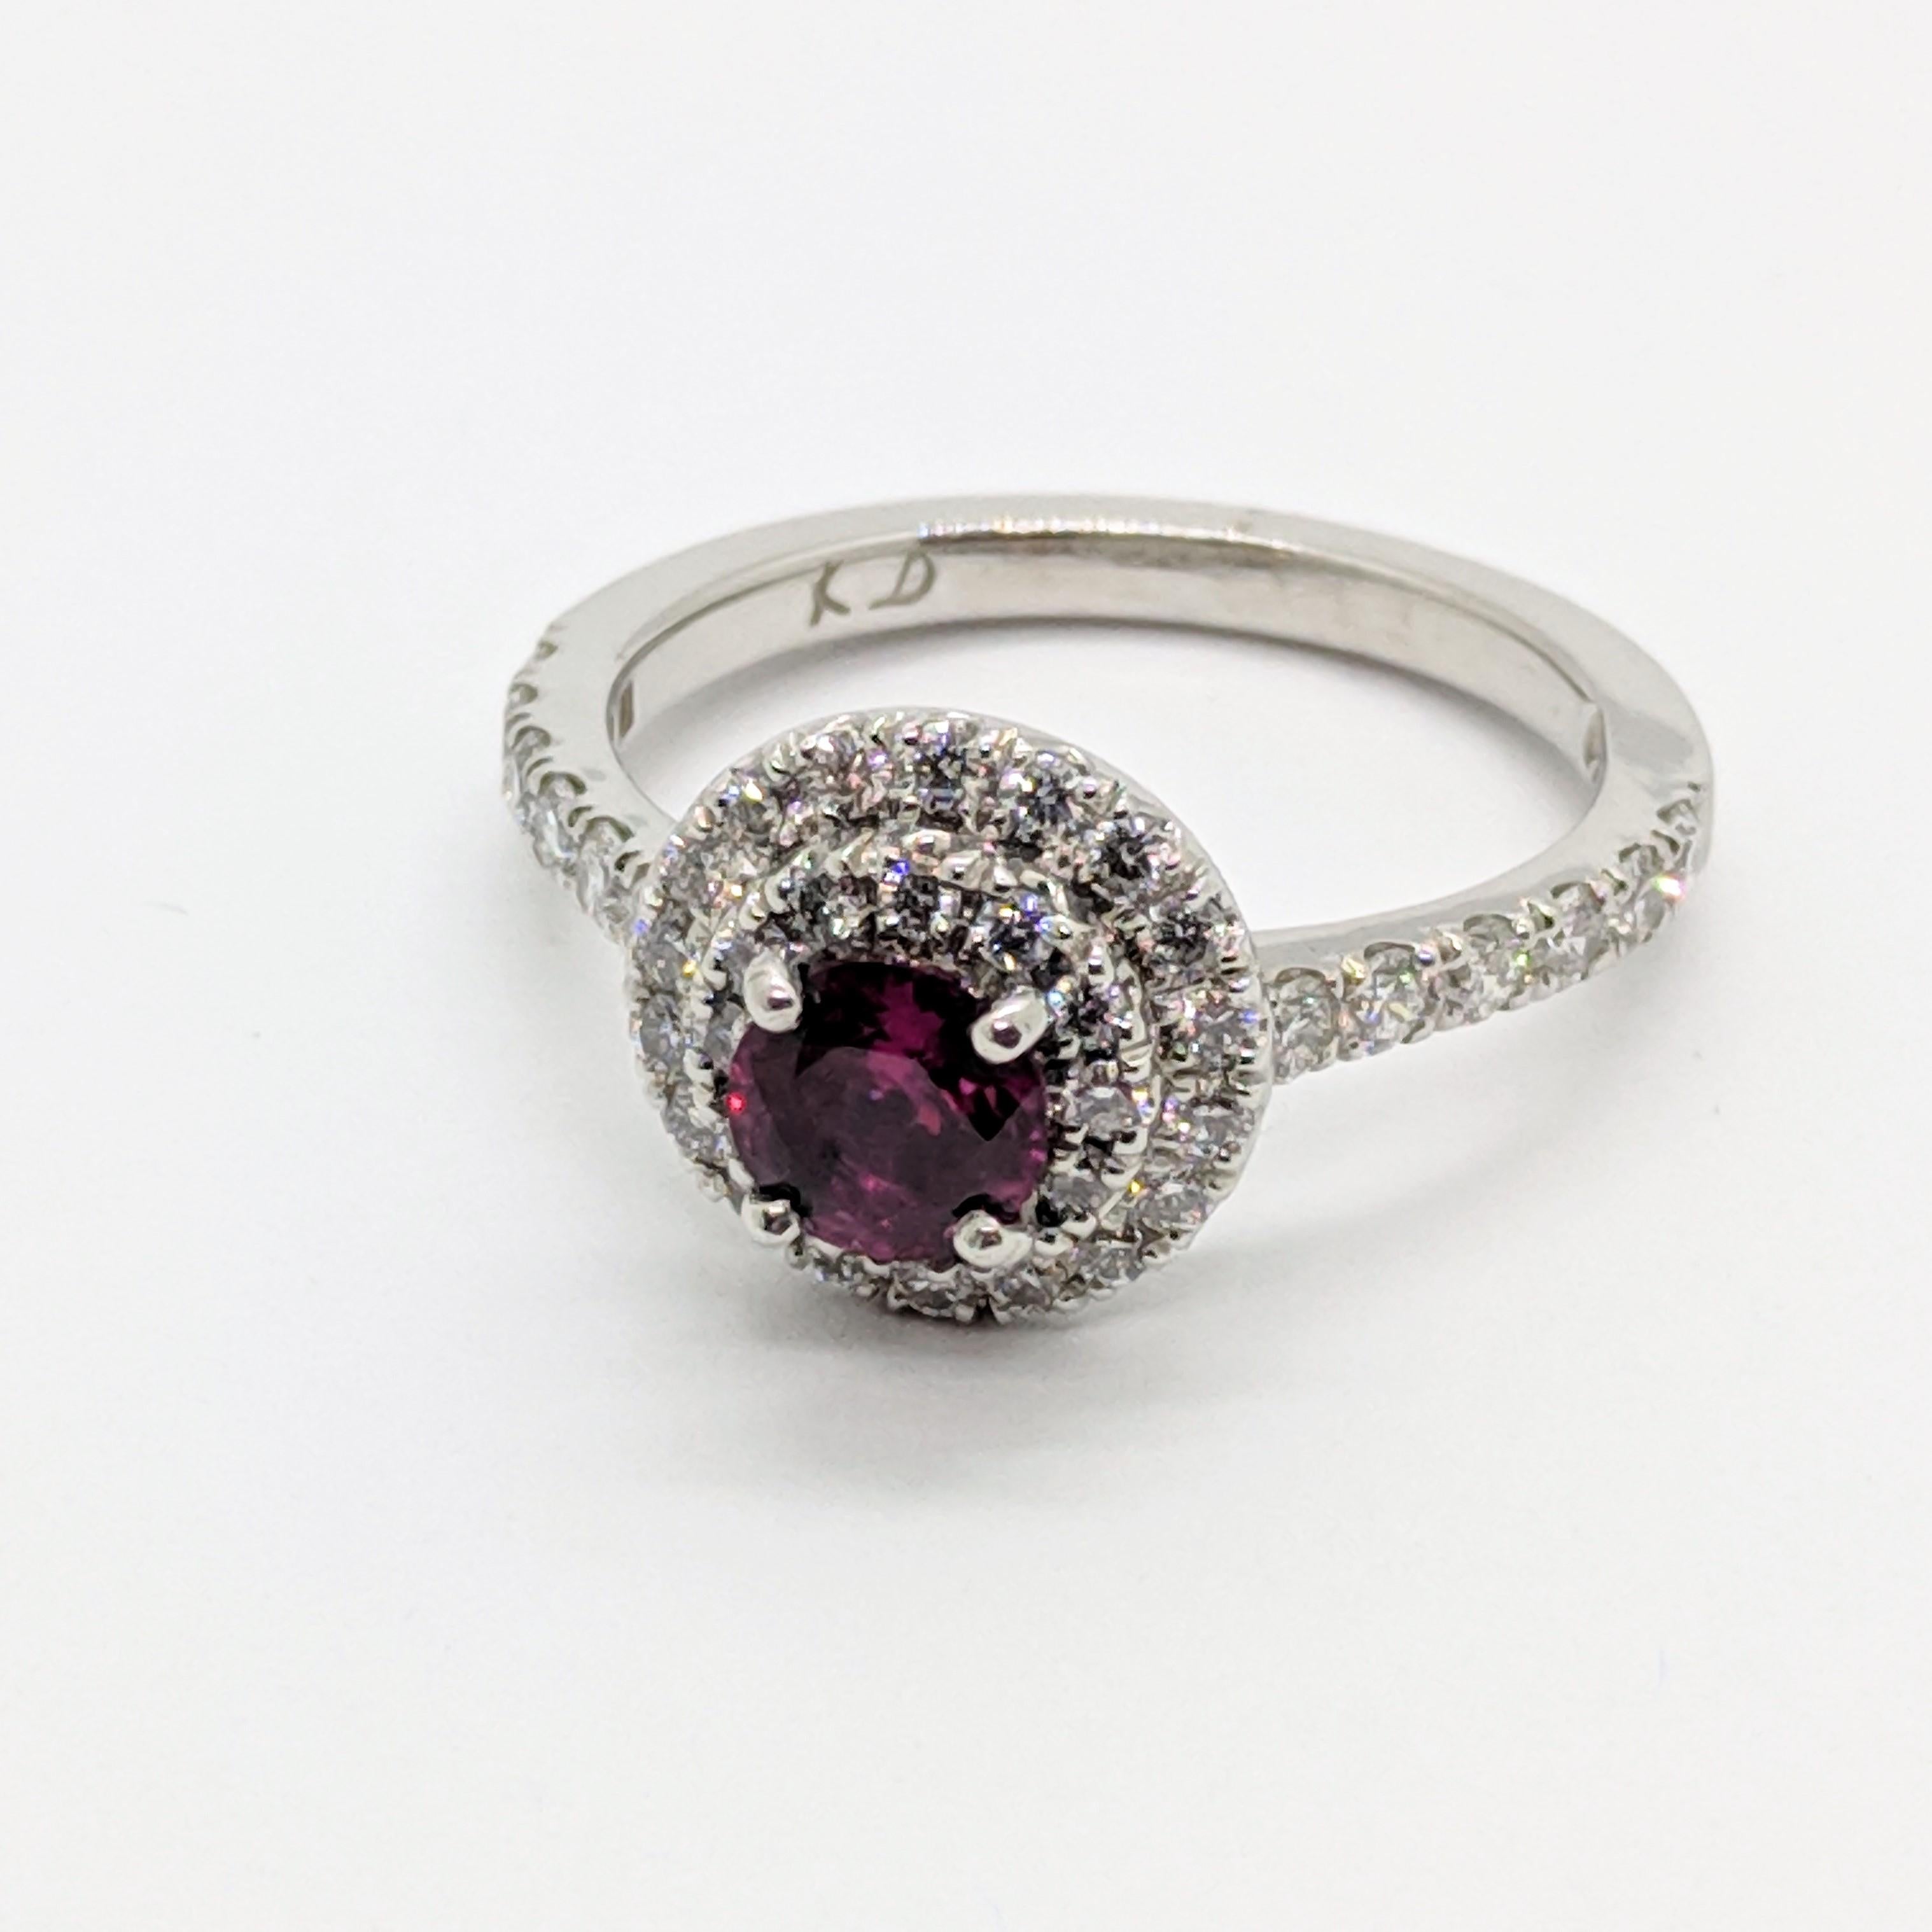 Kian Design Platinum 0.68 Carat Round Ruby Diamond Double Halo Engagement Ring In New Condition For Sale In South Perth, AU